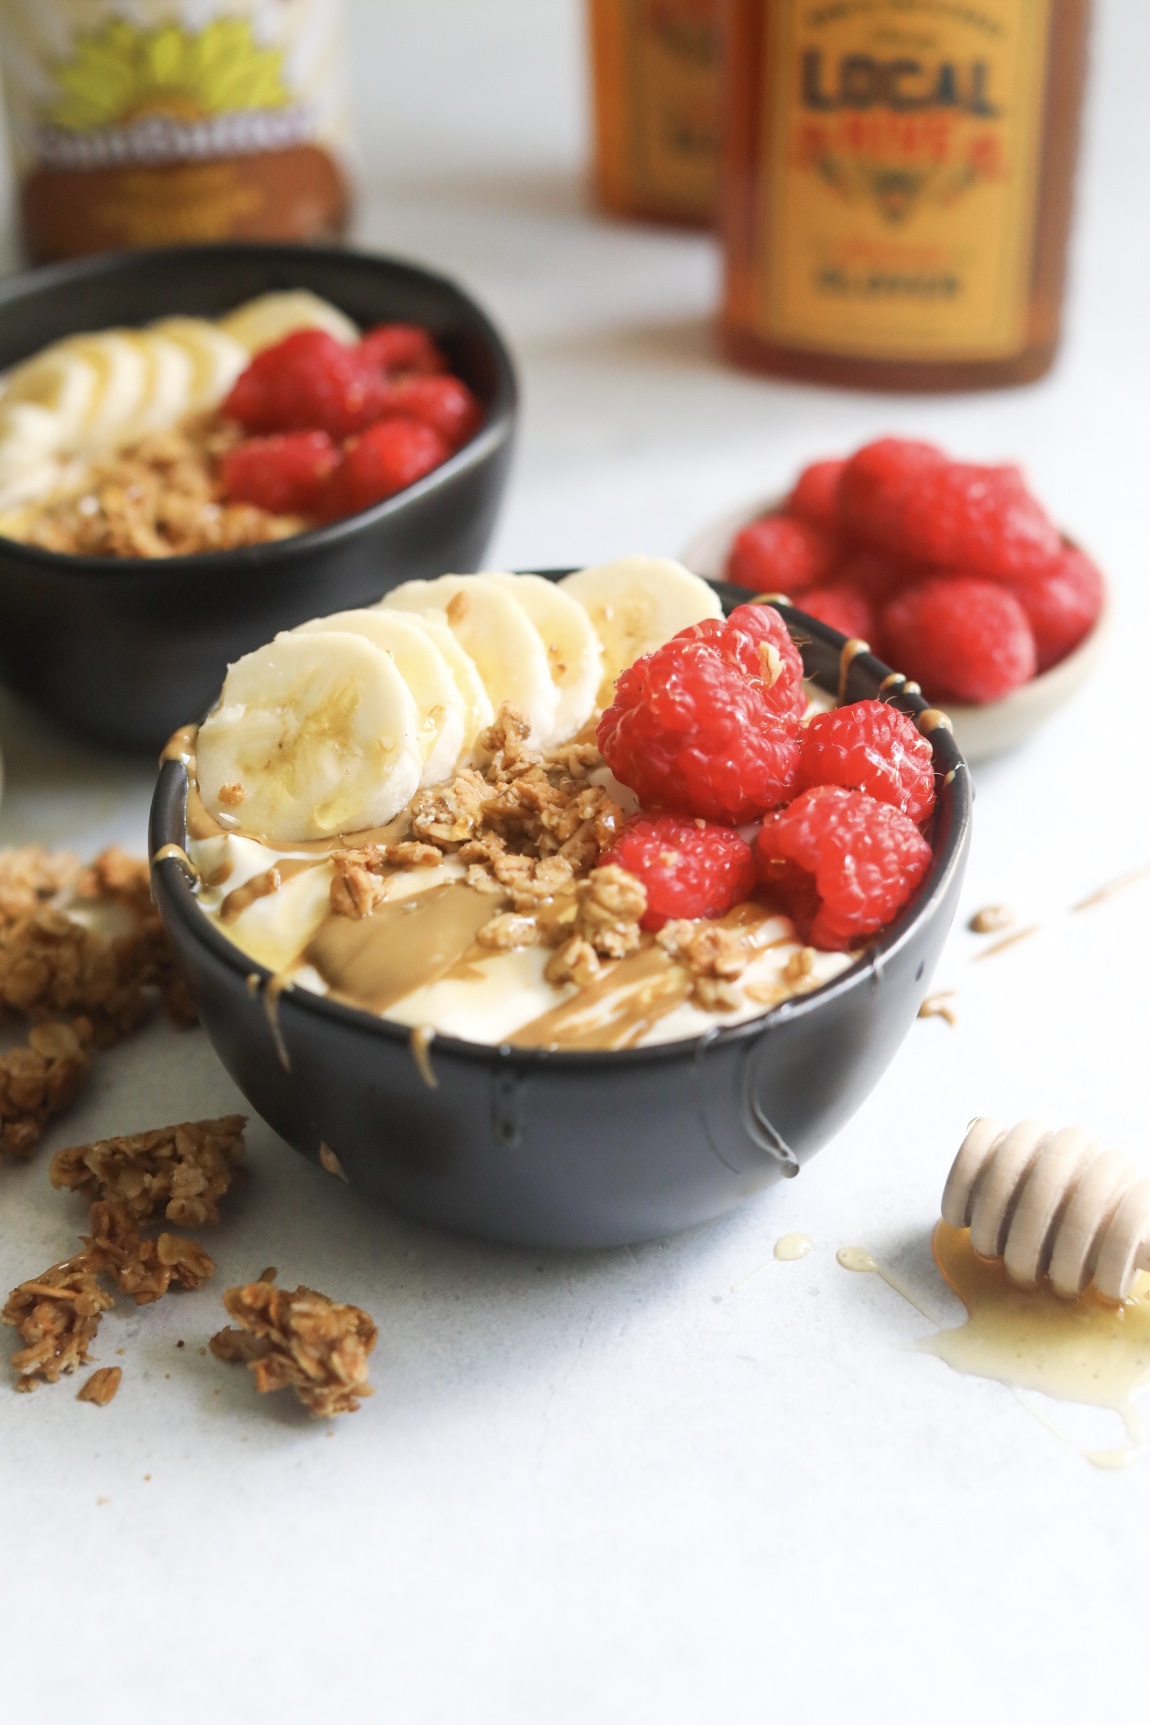 Whipped yogurt bowl with toppings in black bowl with a honey stick to the left of the bowl for decorative purposes. Out of focus behind the focal bowl is an additional dressed bowl with bottles of honey and sunflower butter.